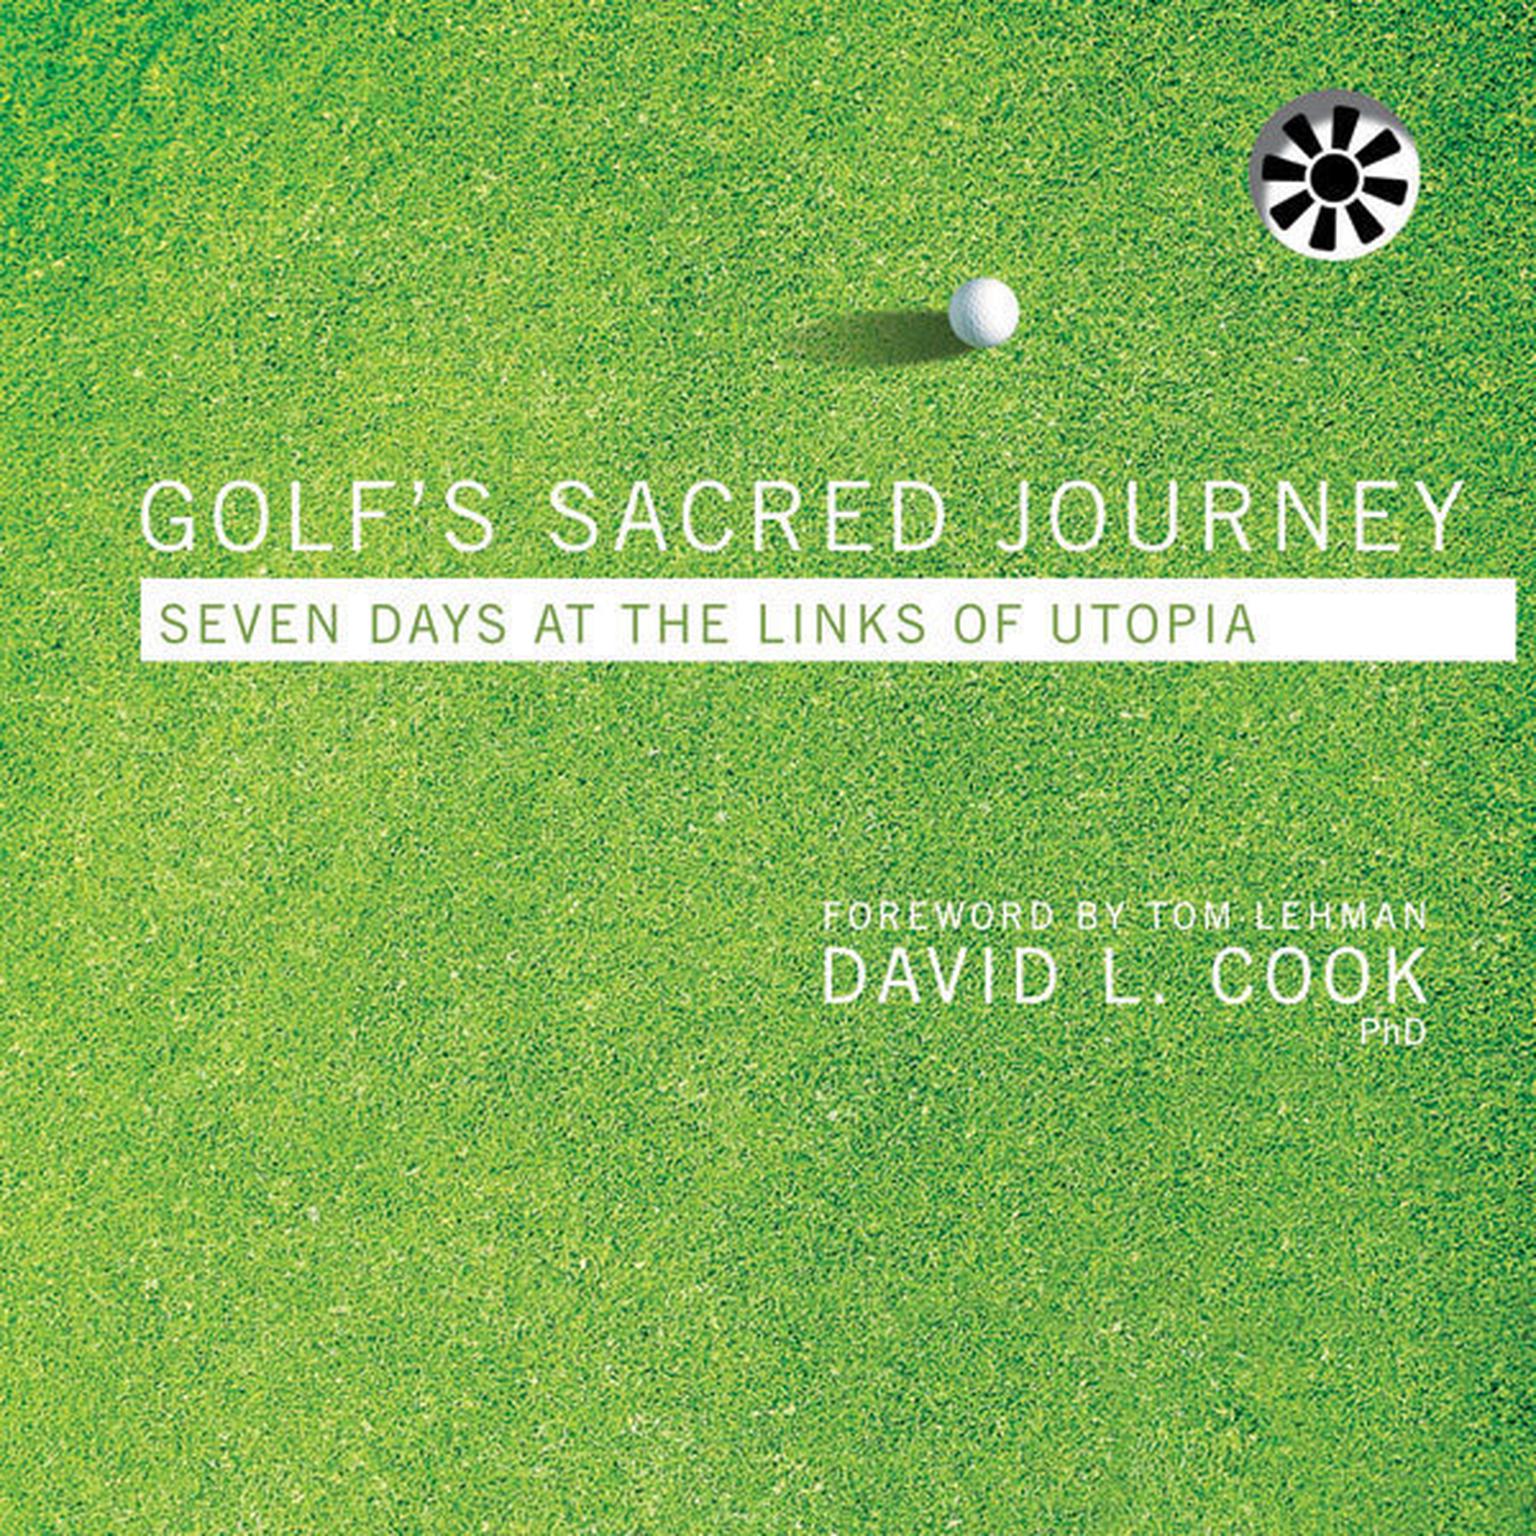 Golfs Sacred Journey: Seven Days at the Links of Utopia Audiobook, by David L. Cook